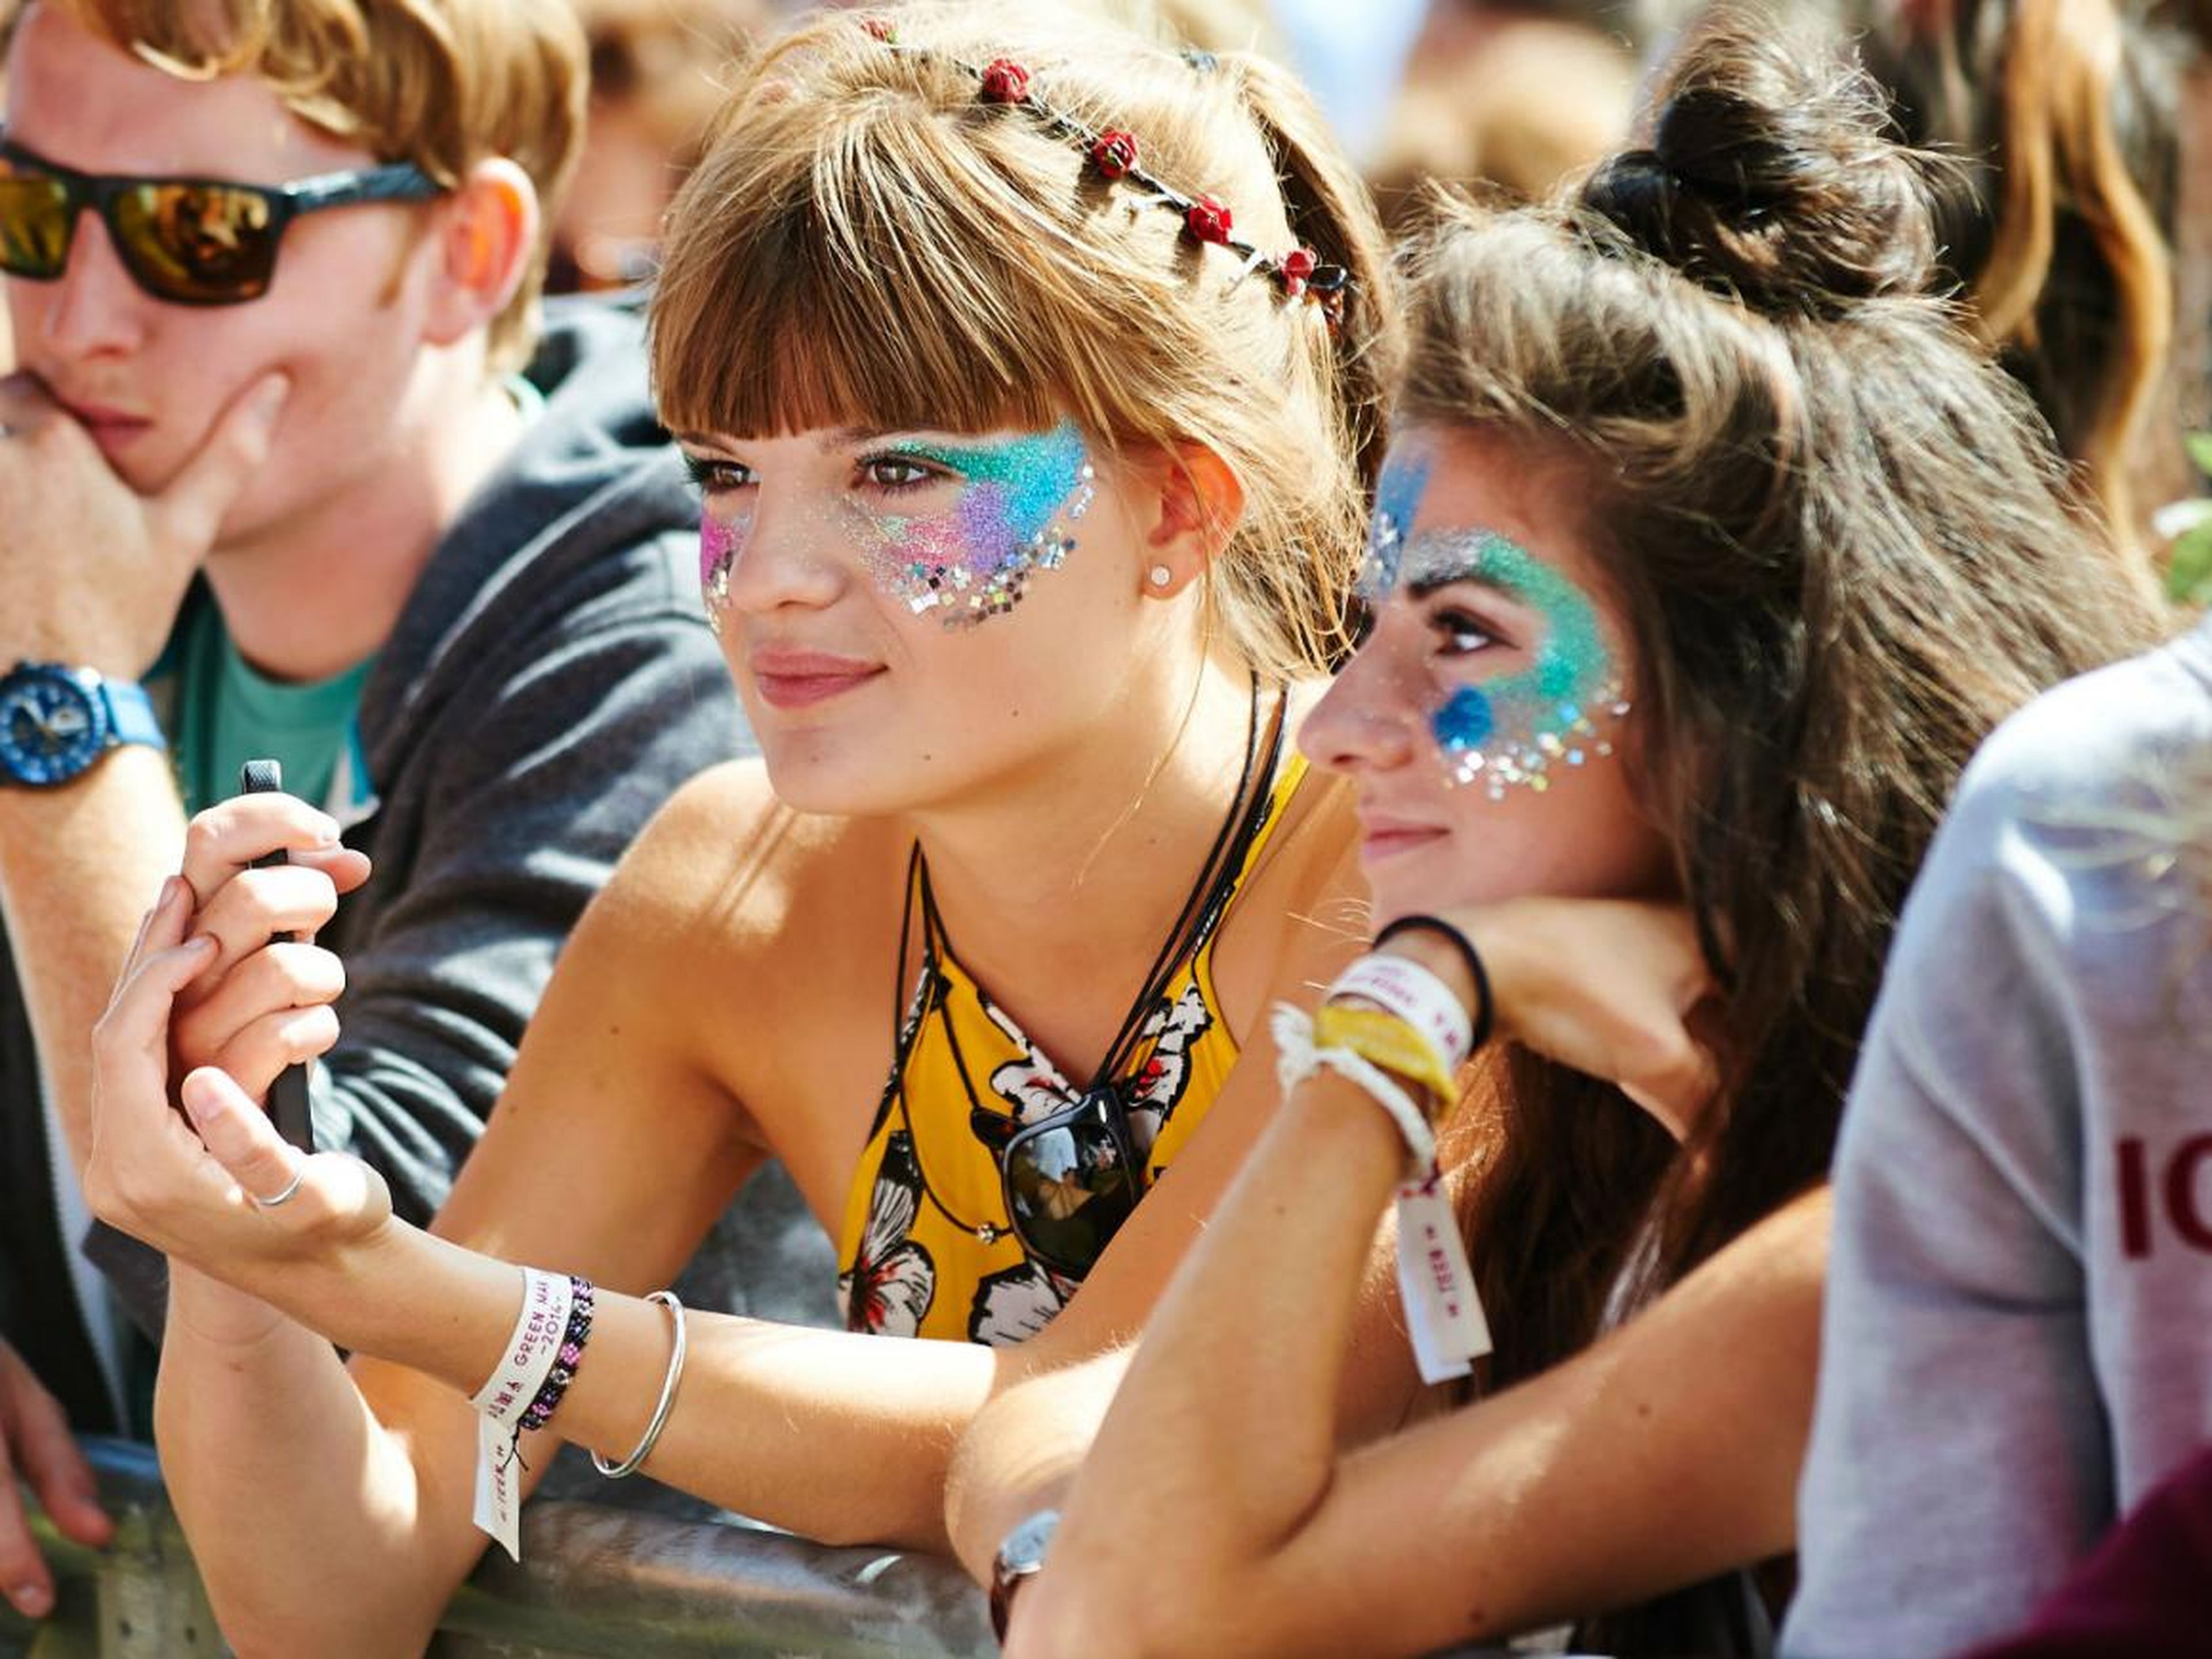 Glitter was banned from many festivals in the UK in 2018.